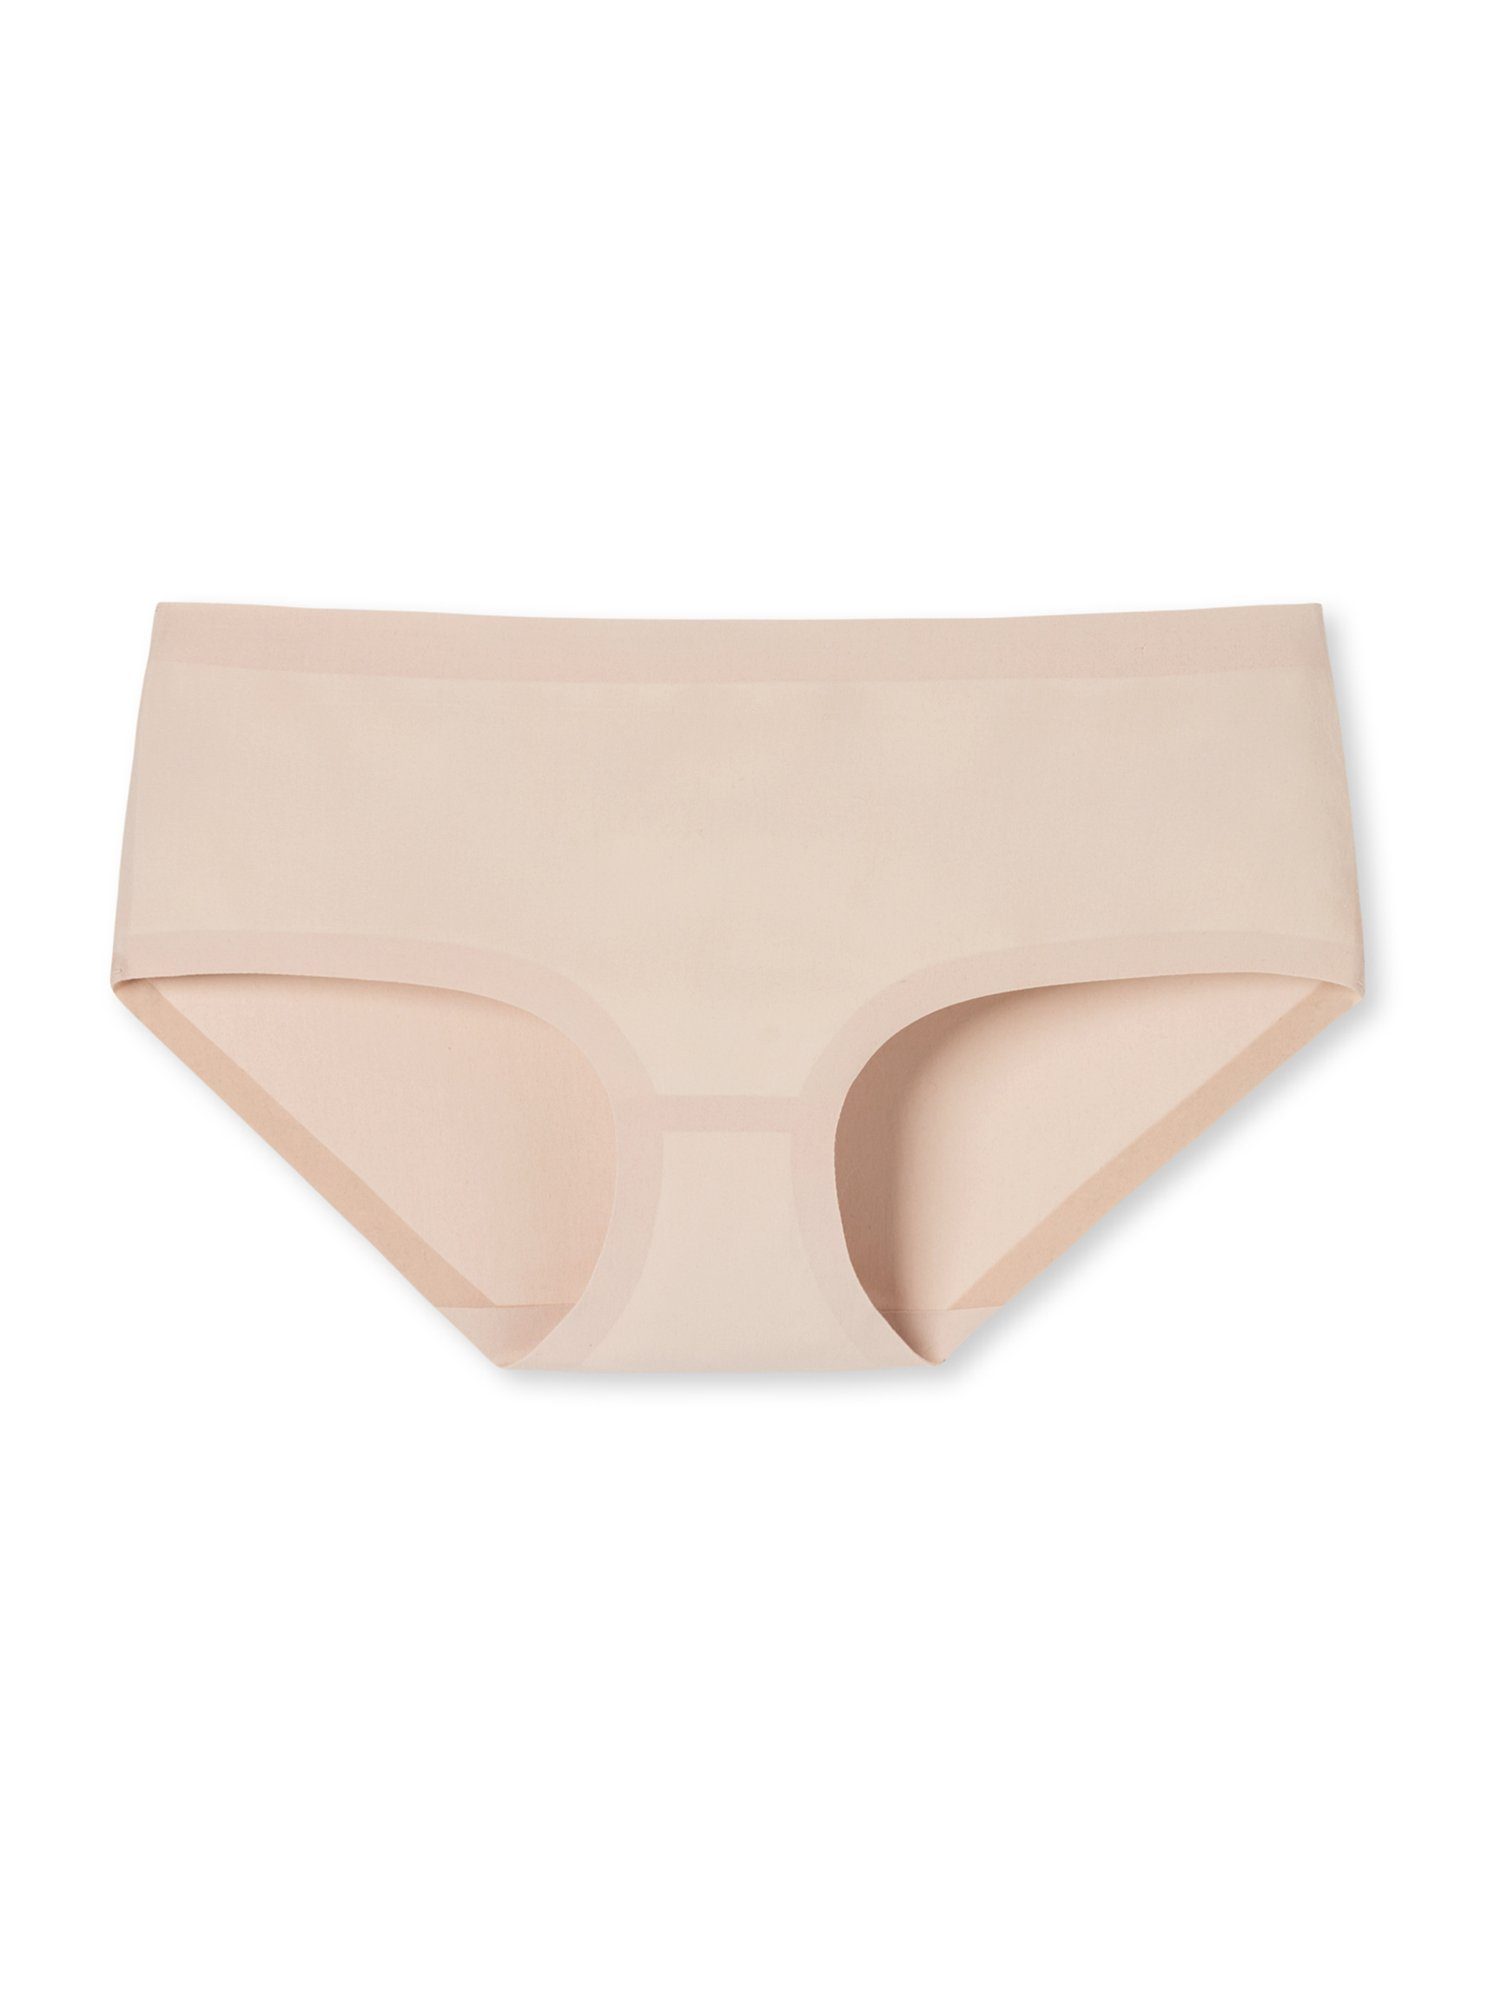 sand (1-St) Schiesser Panty Cotton Invisible